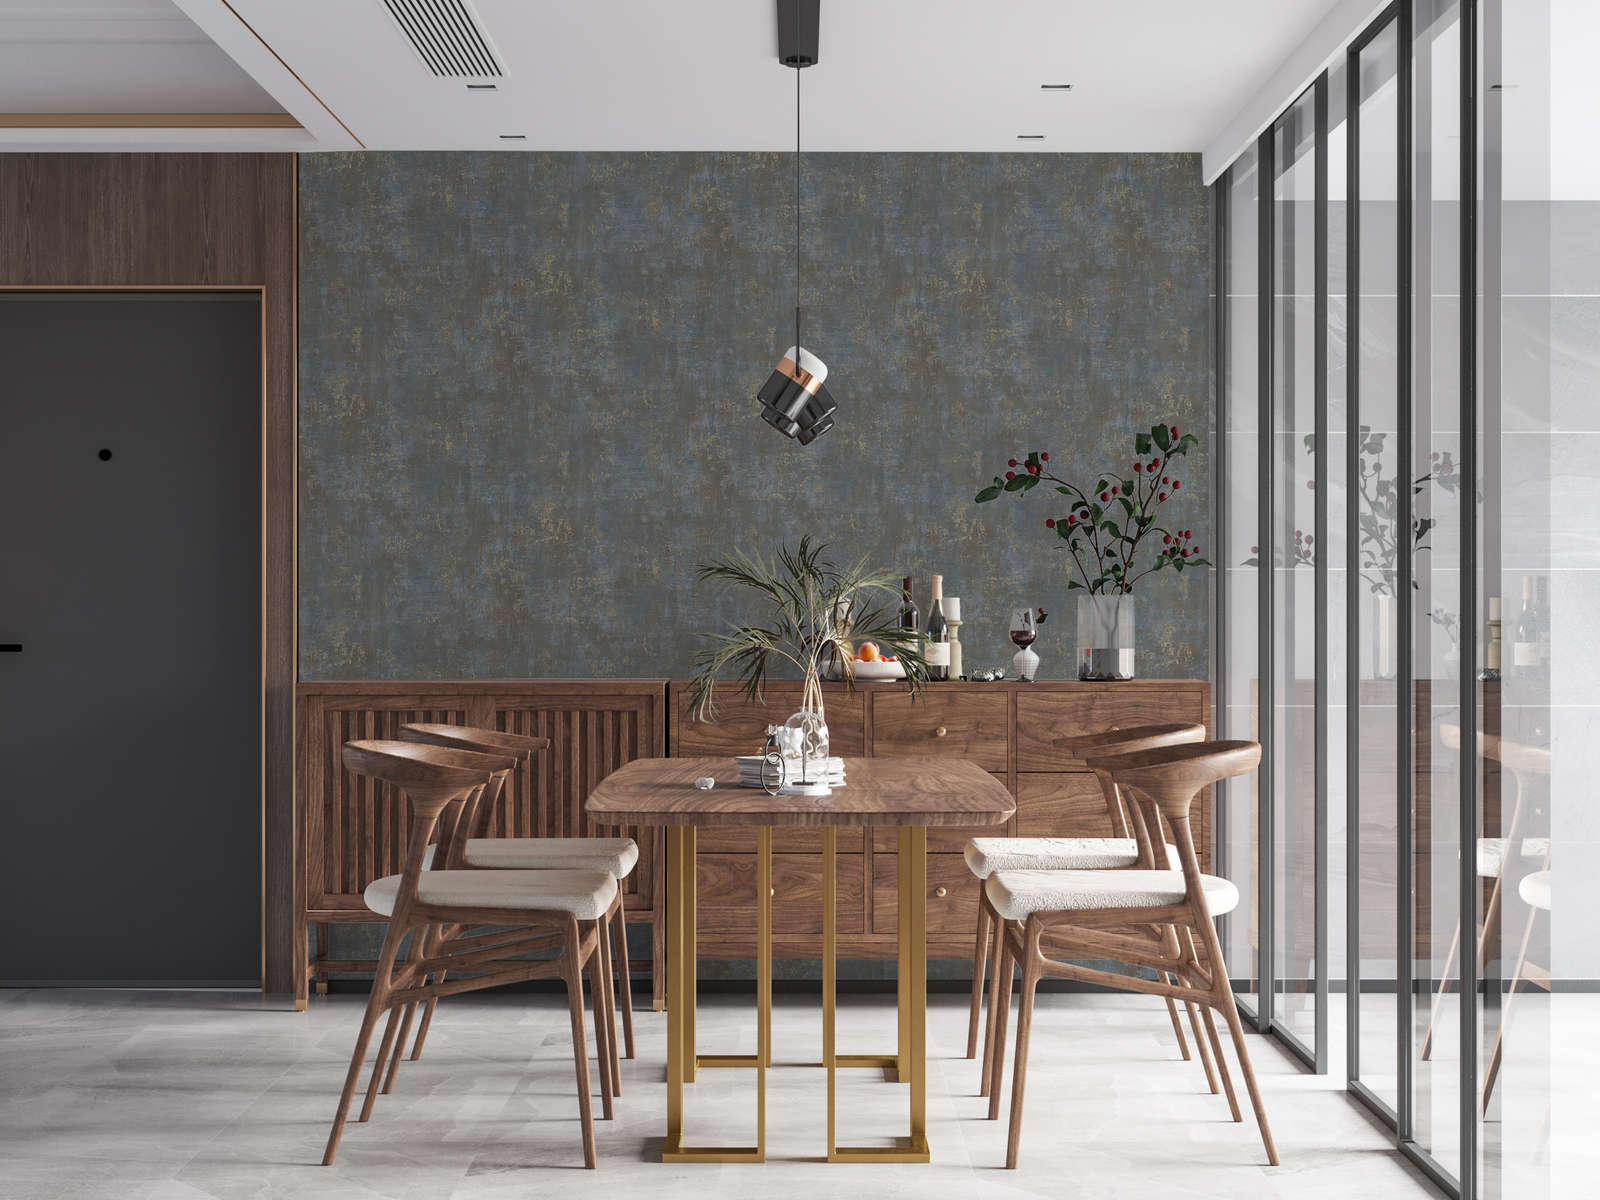             Rust-look wallpaper with metallic accents - brown, blue, gold
        